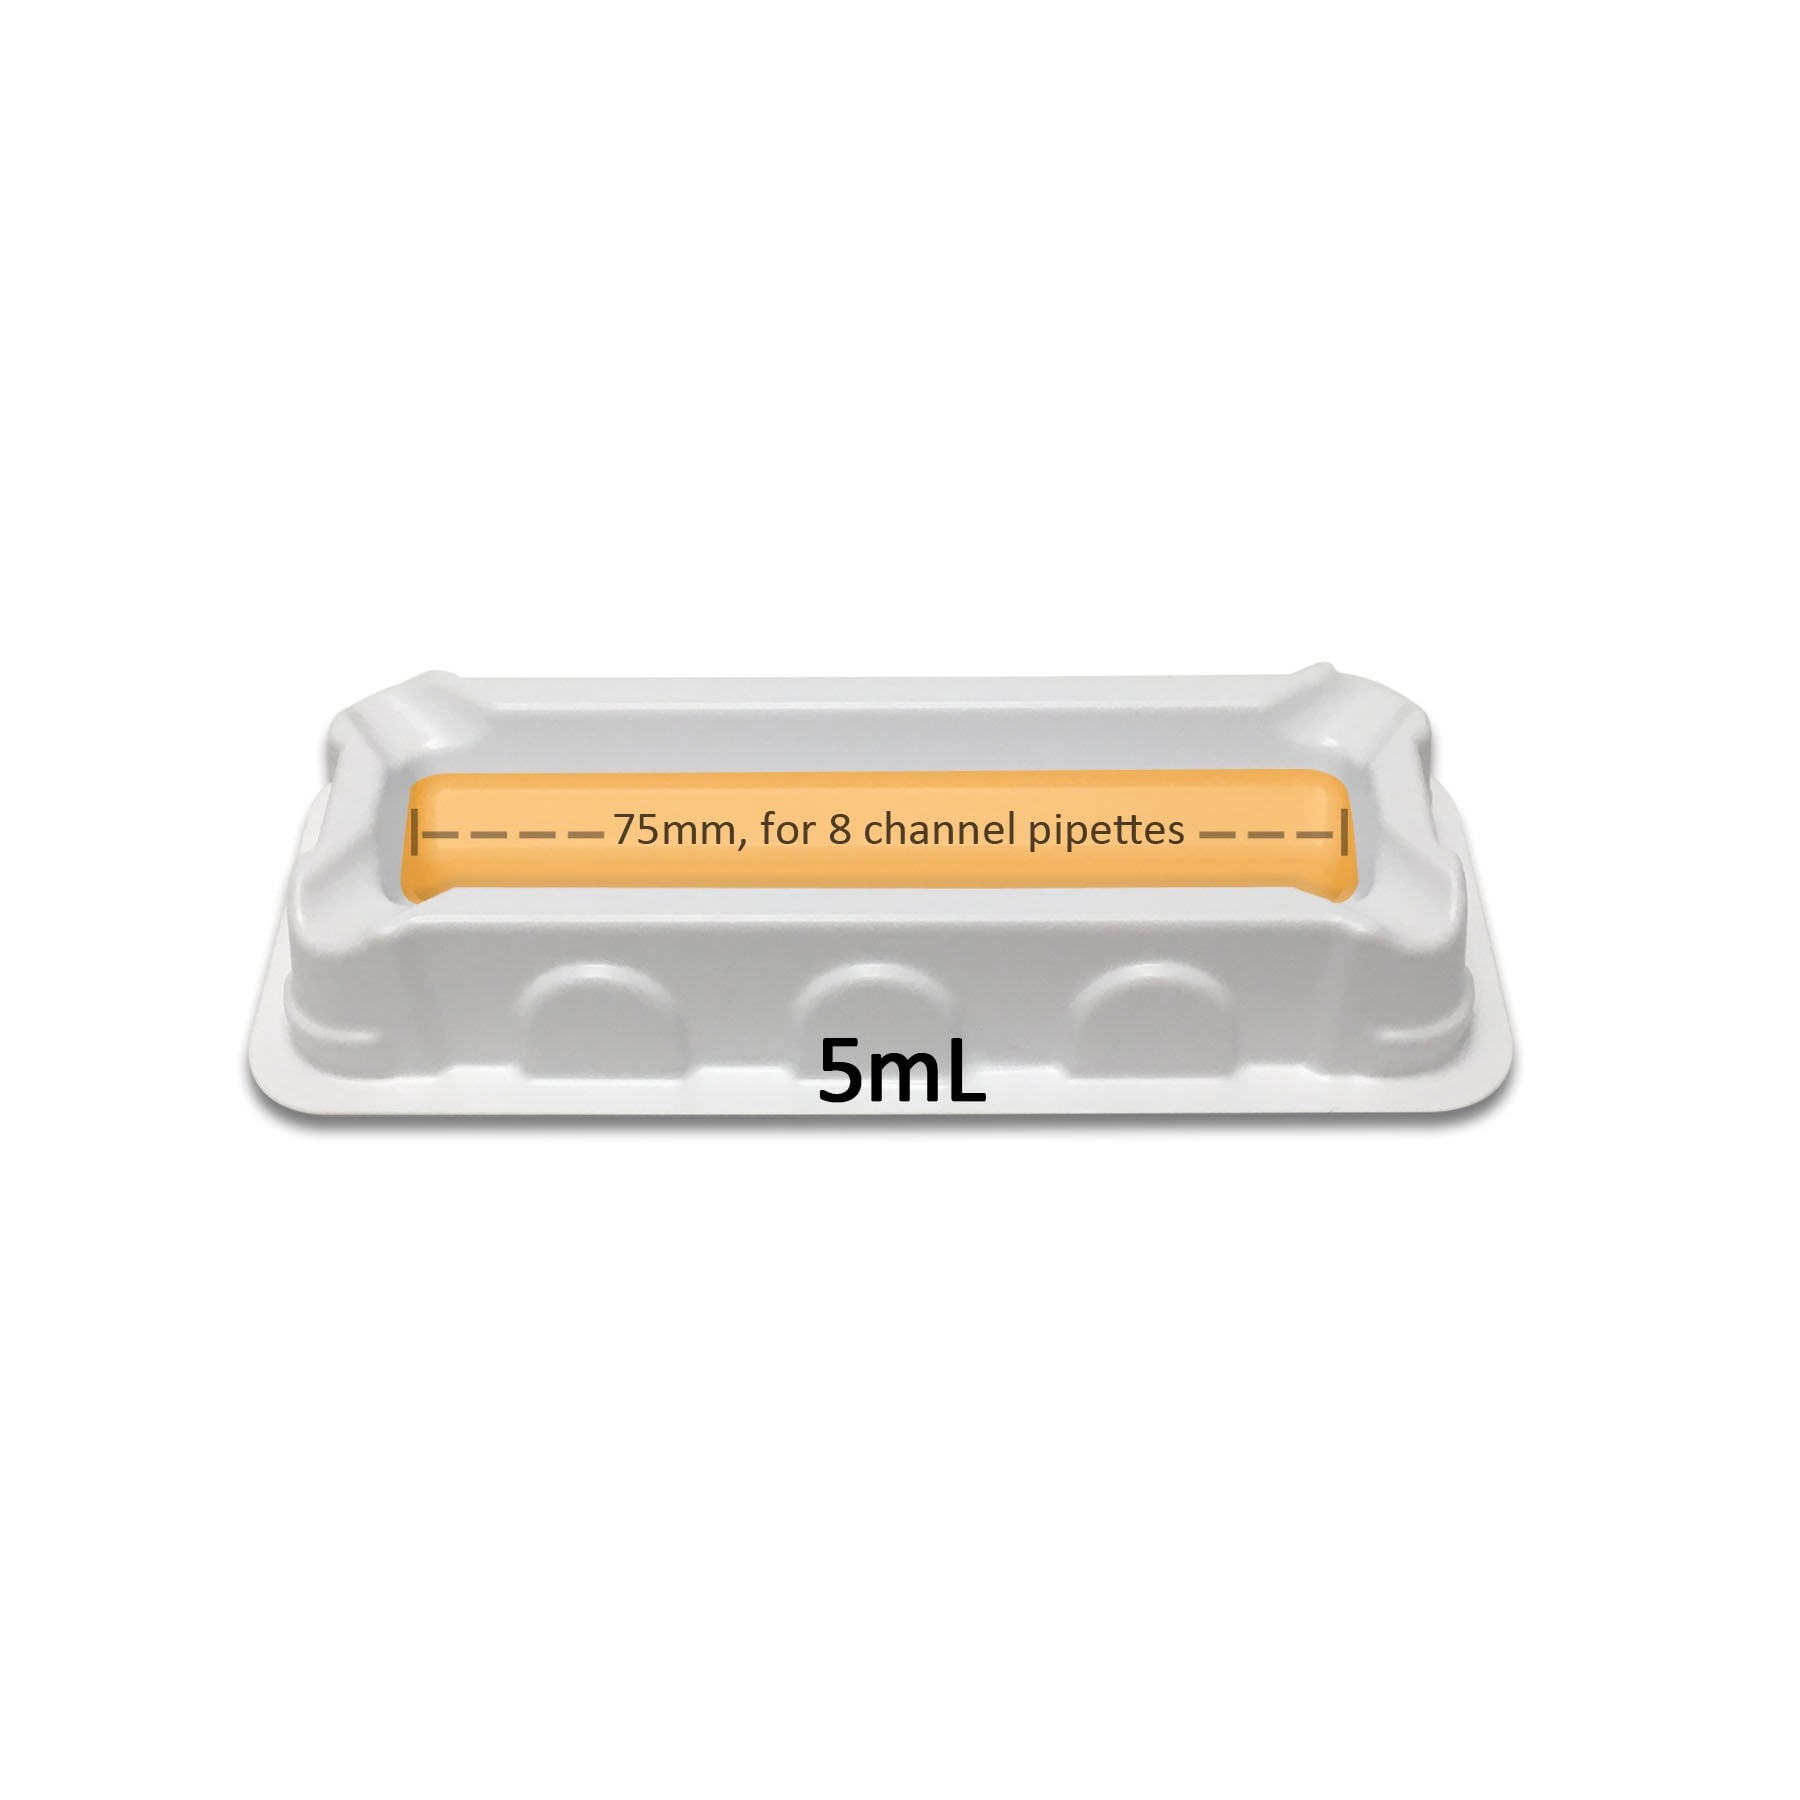 MTC Bio P7005-1S ASPIR-8™ Solution Reservoirs, 5mL sterile, Individually wrapped